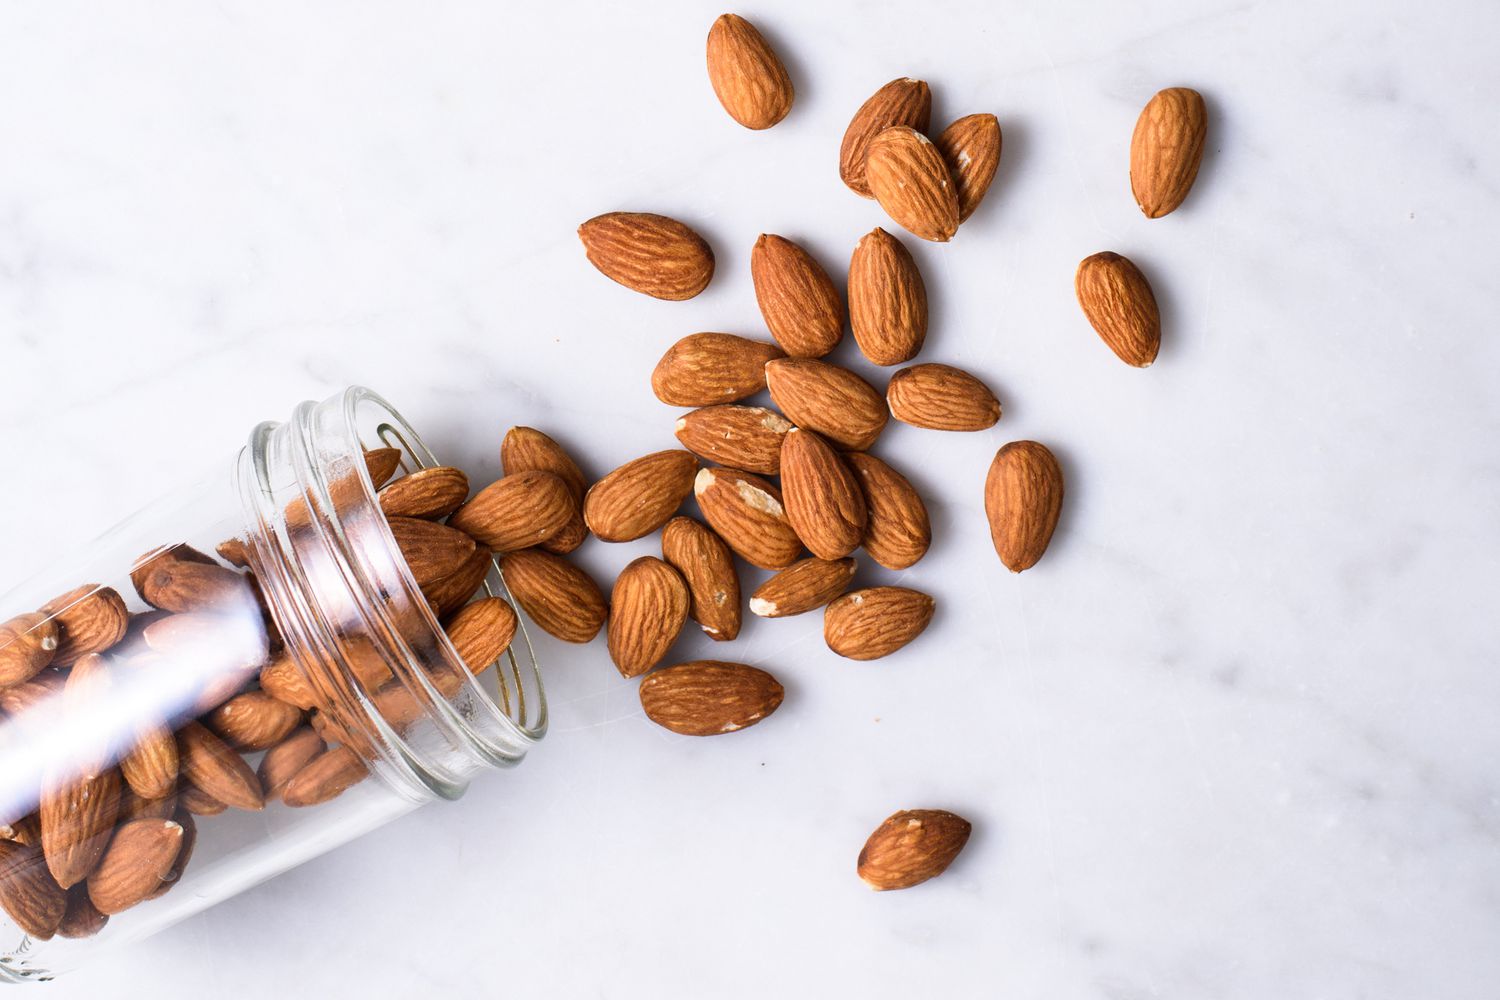 are almonds good for weight loss?